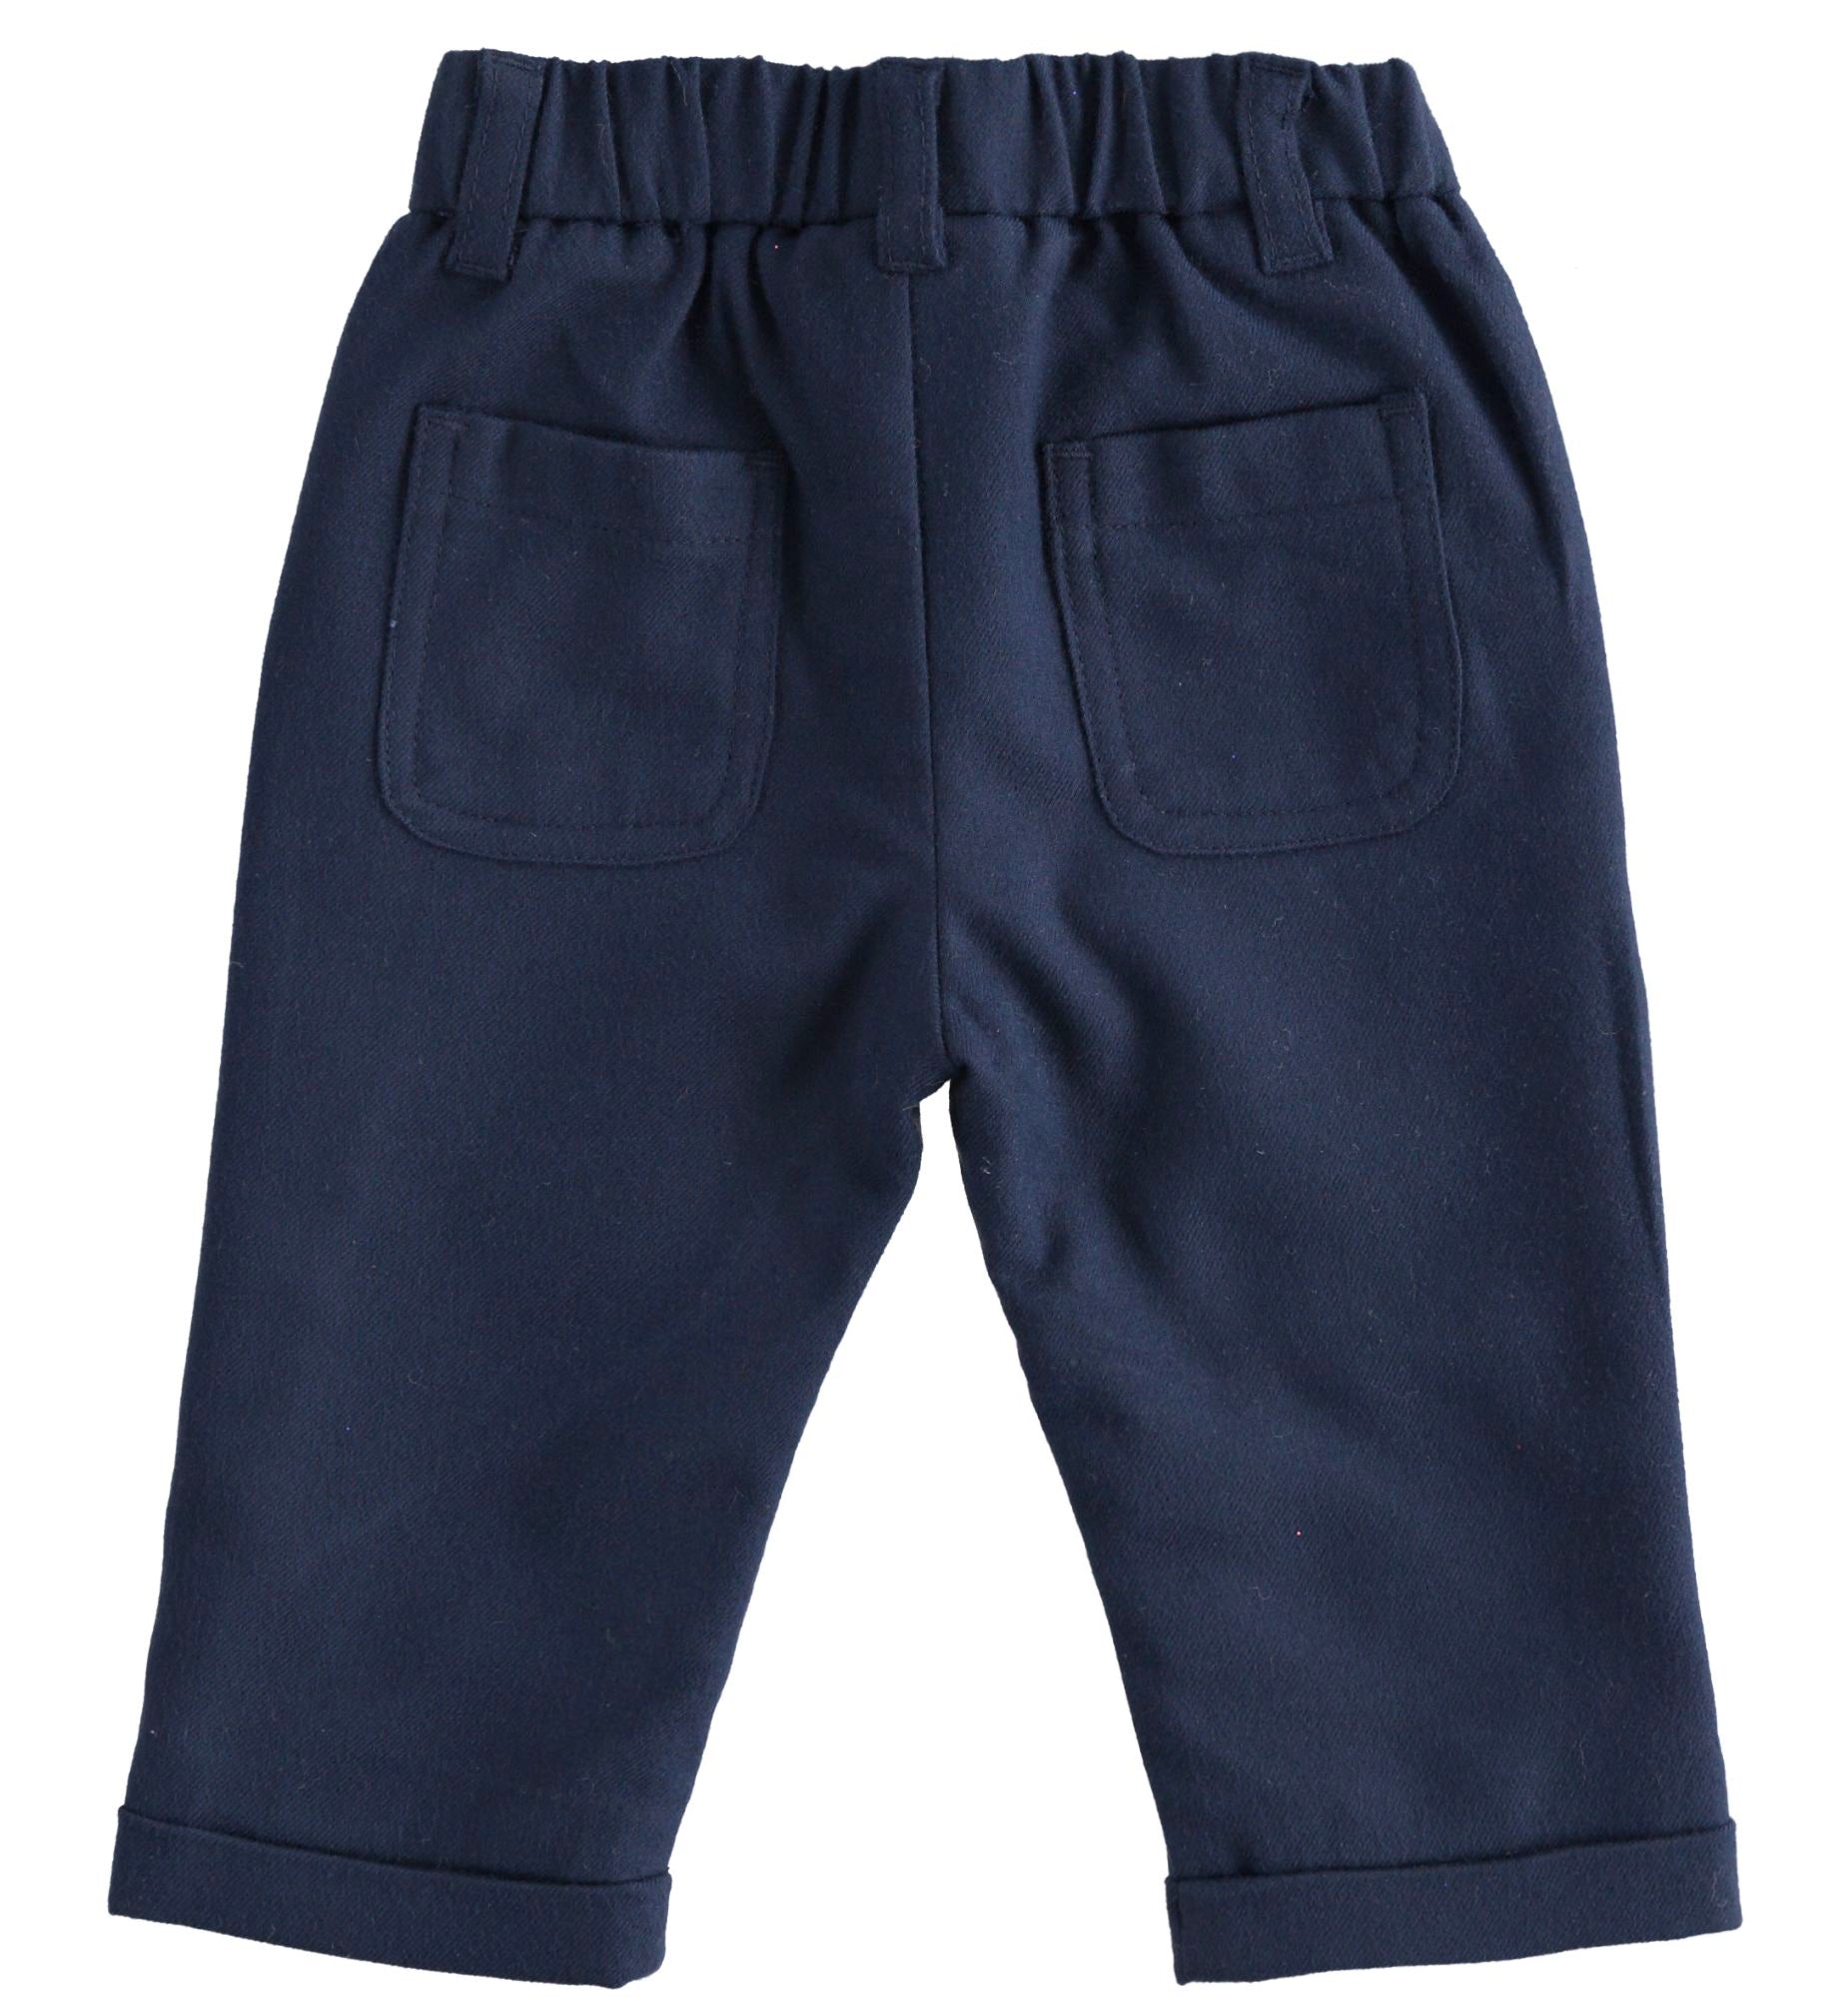 Smart Navy Woven Trousers - LAST ONE IN 12 MONTHS